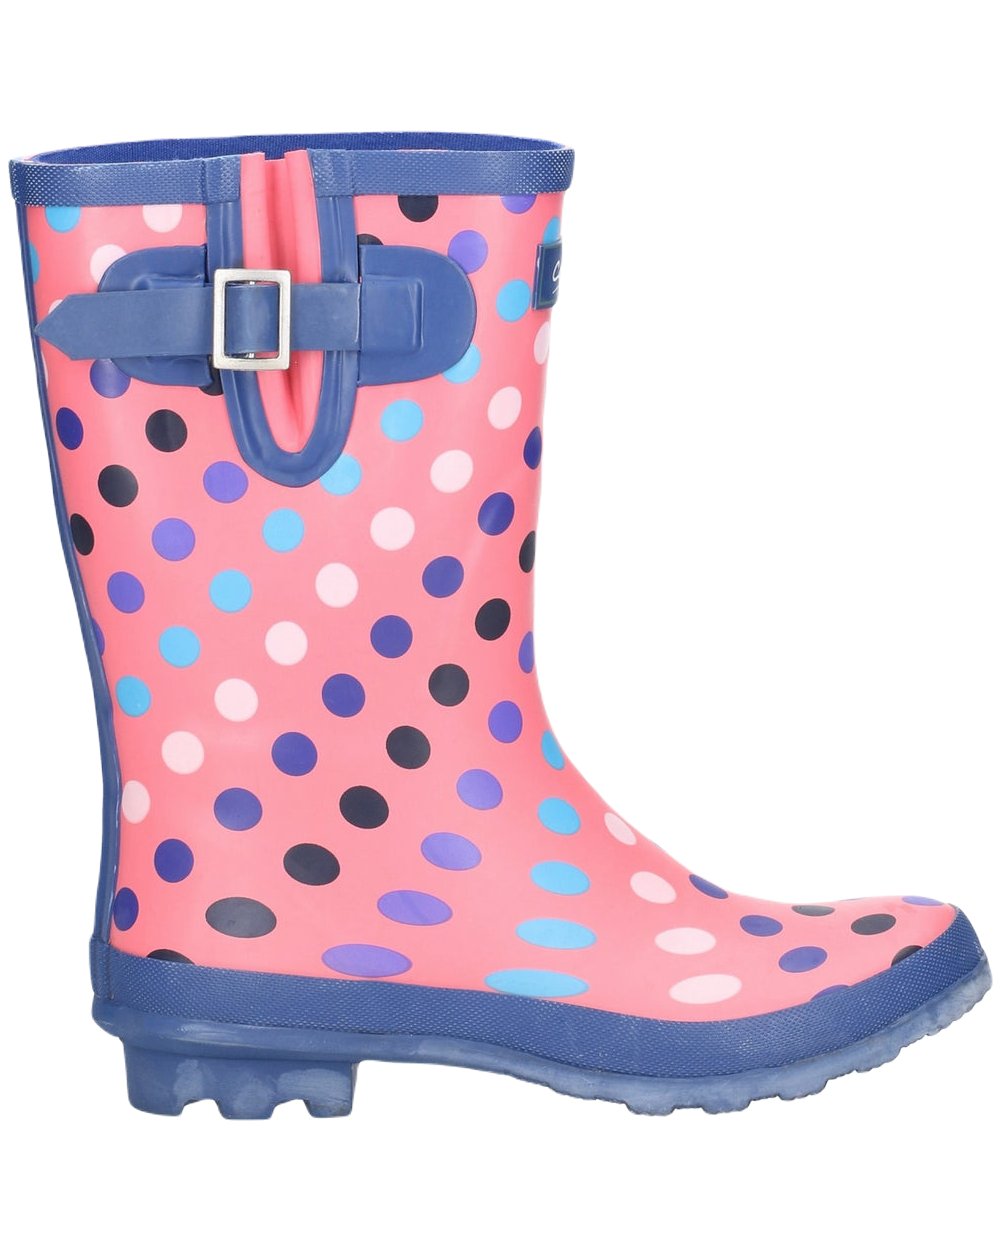 Cotswold Paxford Elasticated Mid Calf Wellington Boots In Pink Multi Spots 